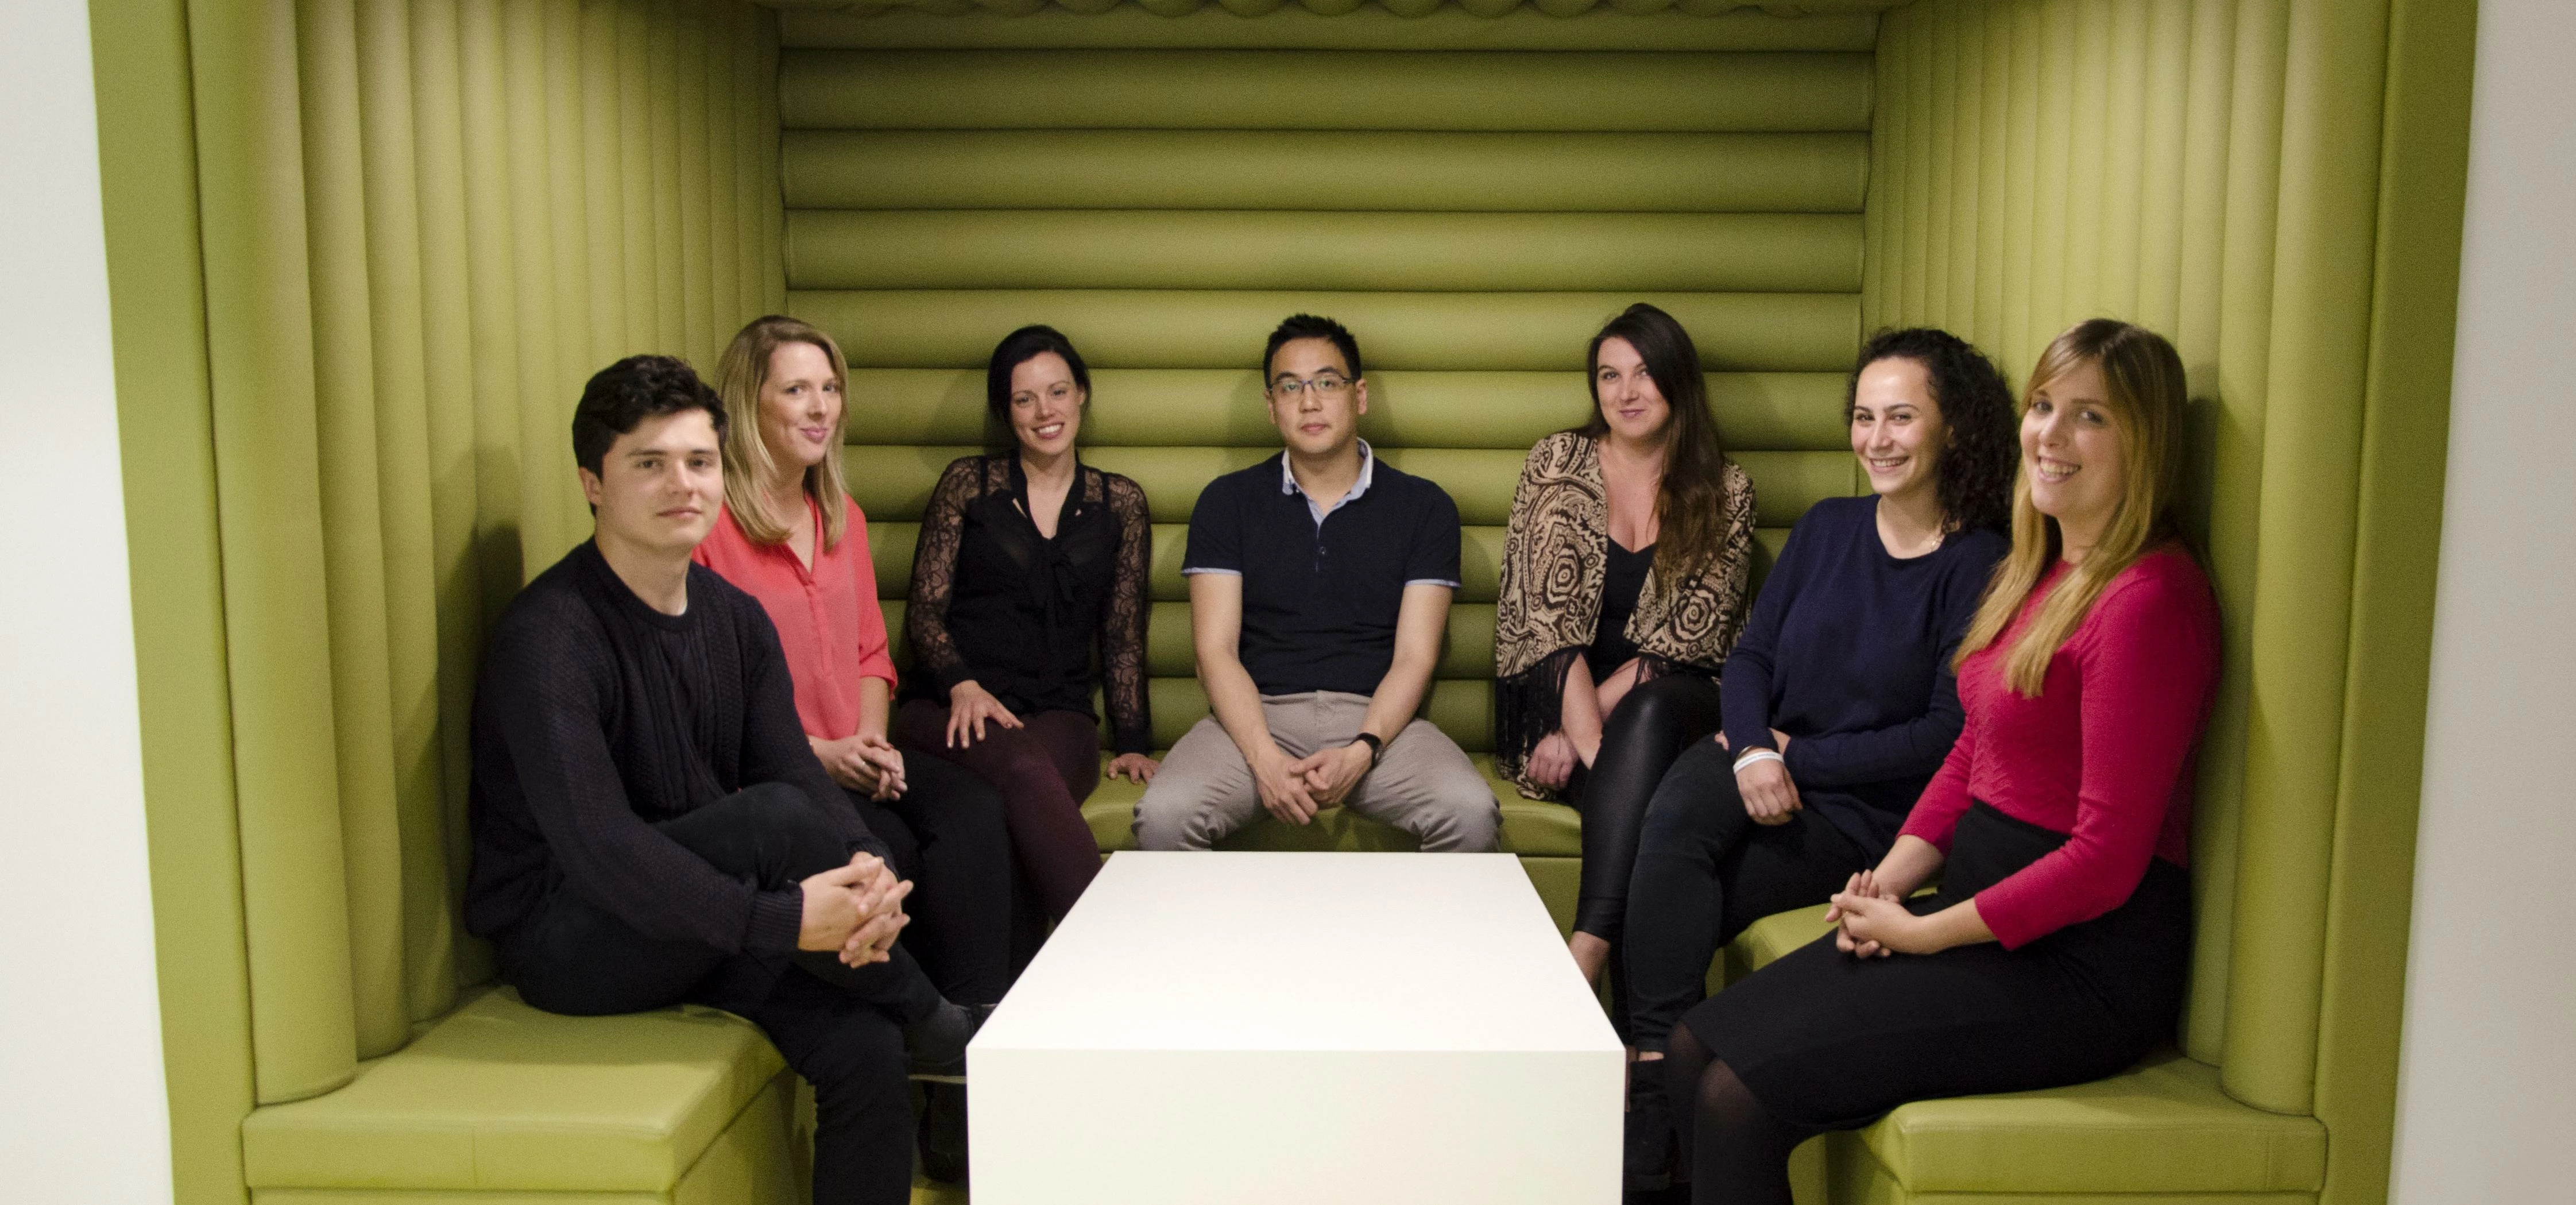 Cube3 welcomes seven new recruits to the team